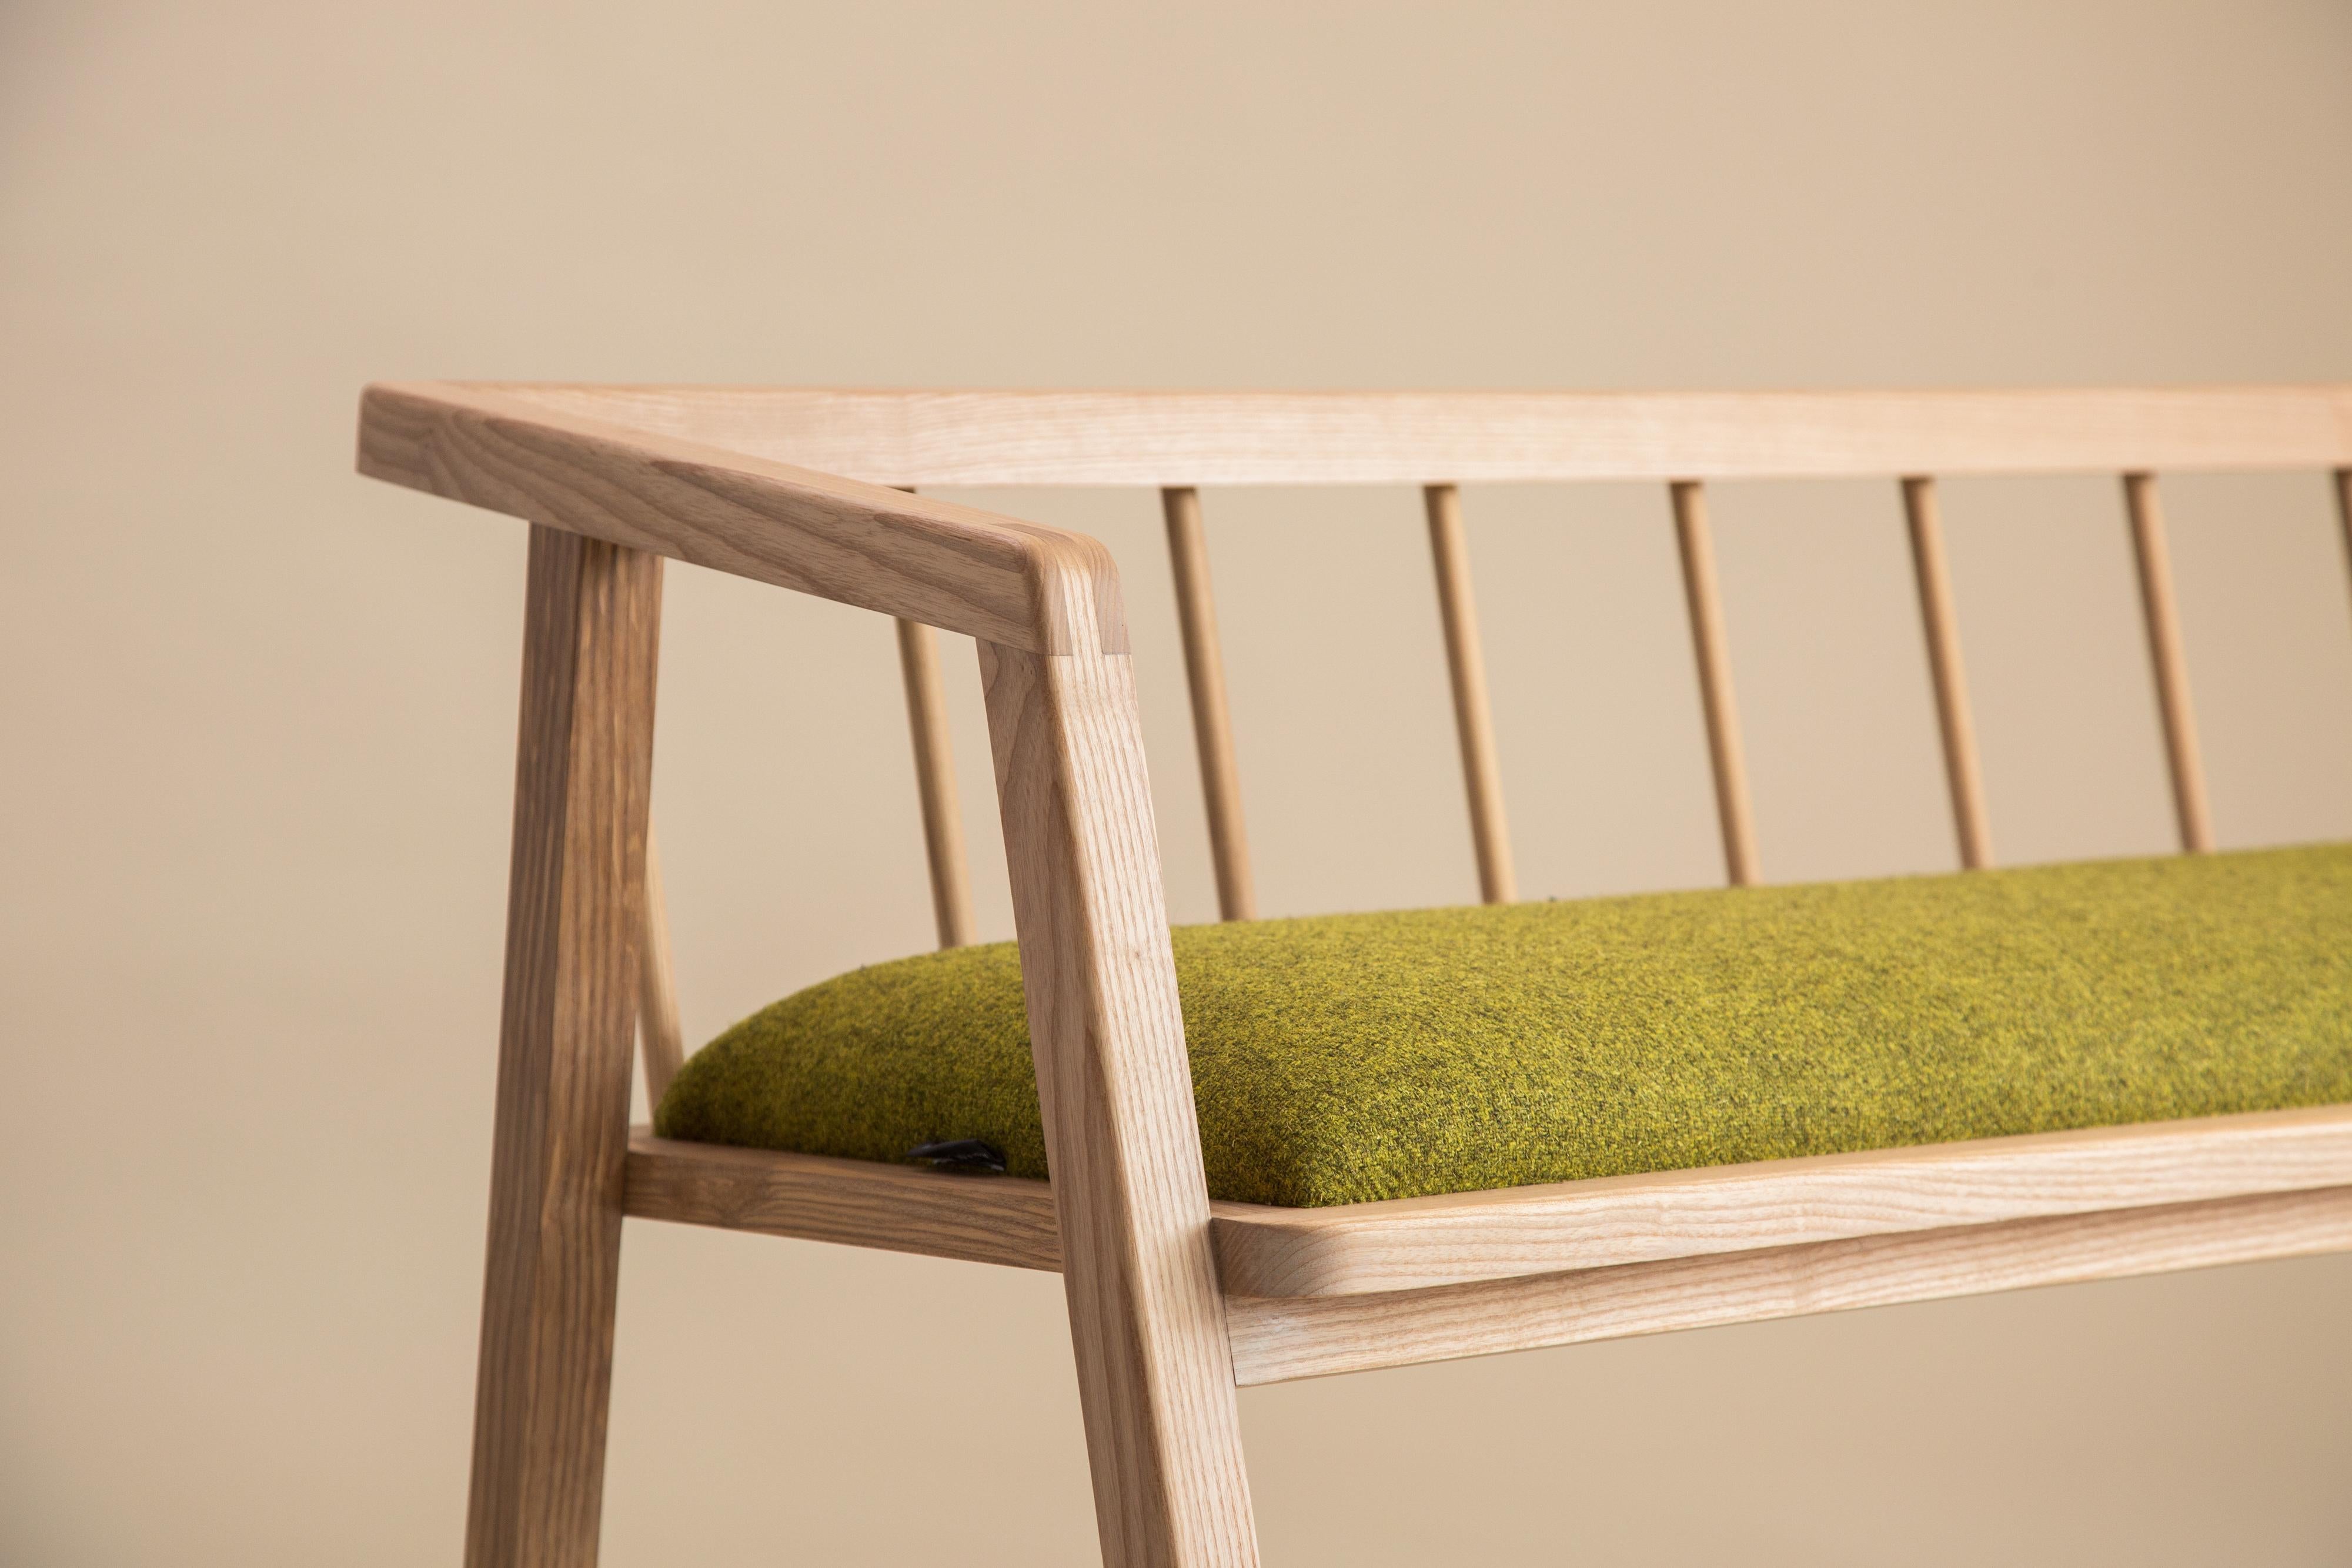 A contemporary two-seater bench, celebrating honest timber construction and native British wood. The framework showcases an upholstered seat using beautiful and sustainable Herdwick wool, from the Lakeland's native sheep breed. 

A clean and simple